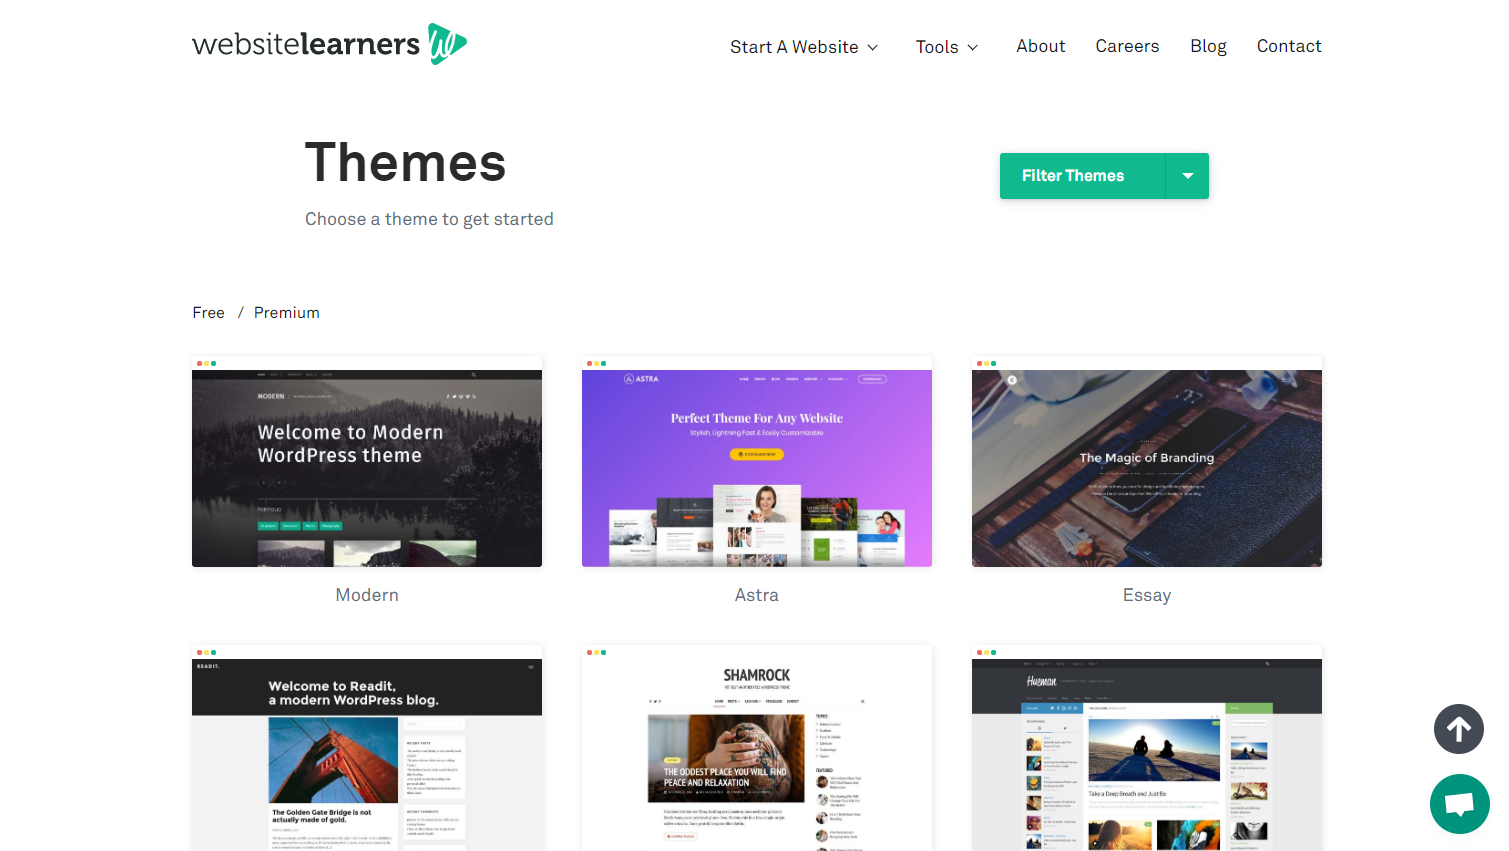 website learners themes page